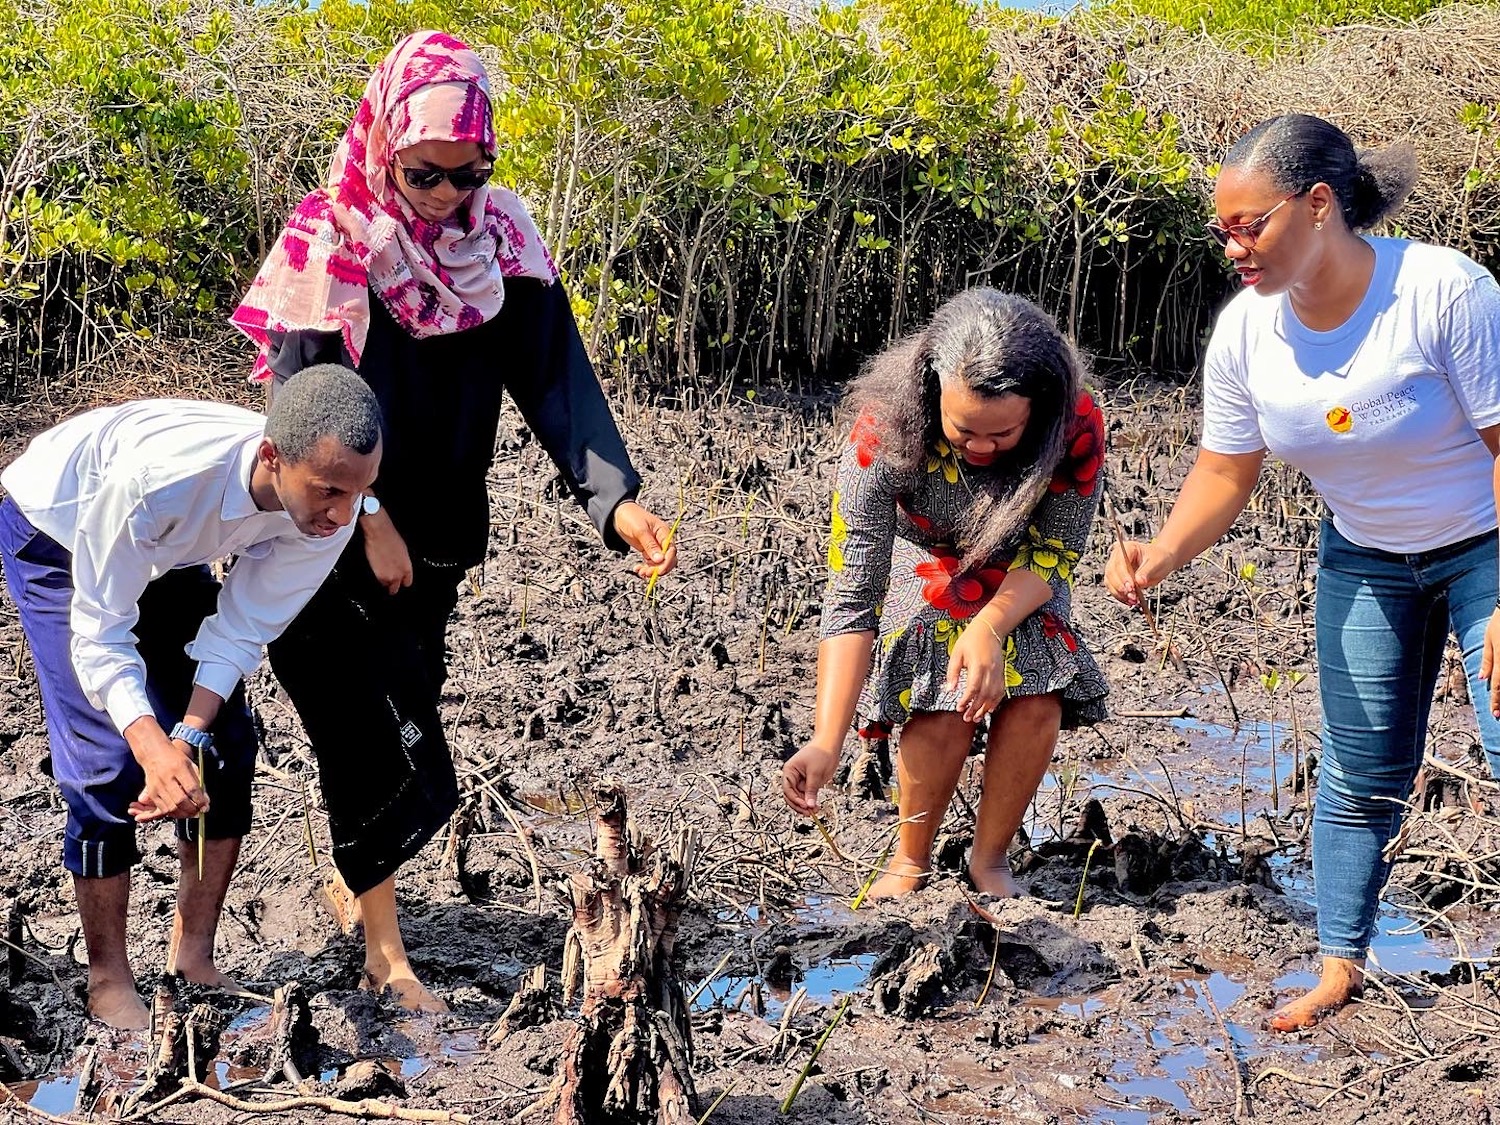 A group of people are planting trees in a muddy area to celebrate International Day of Peace in Tanzania.